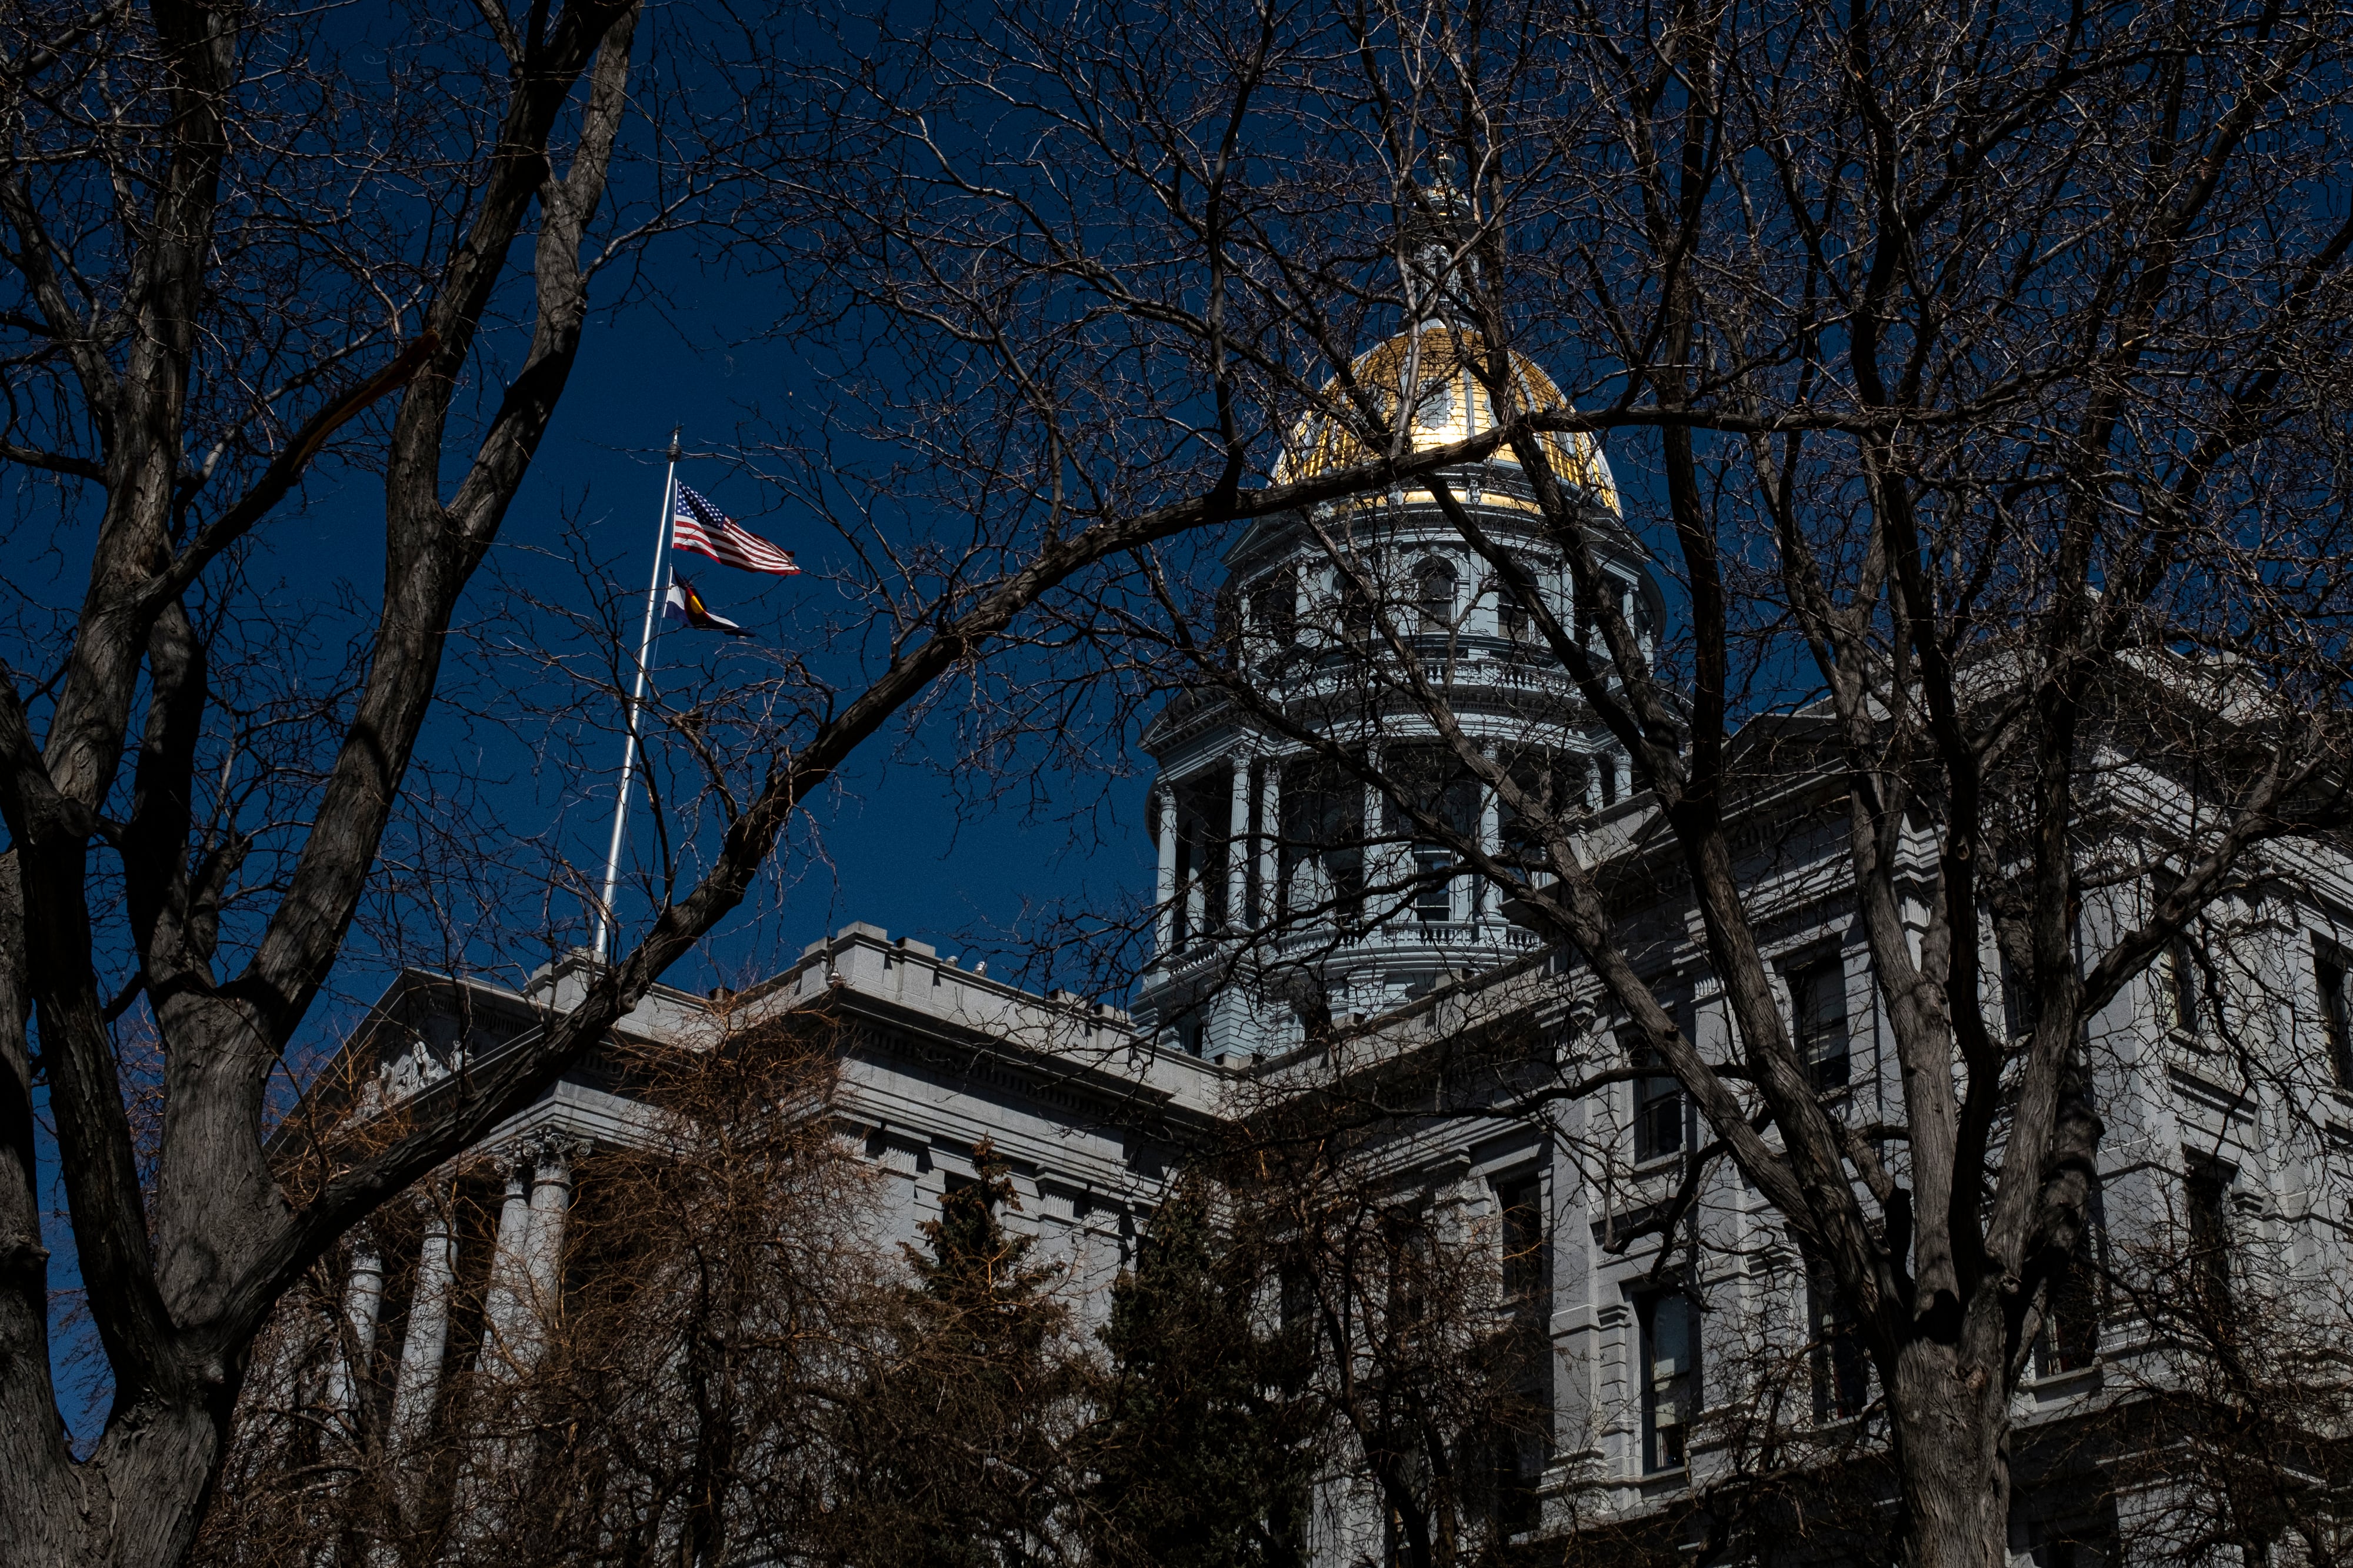 The Colorado Capitol with its golden dome is seen behind bare tree branches and against a blue sky. An American flag flies from the rooftop.